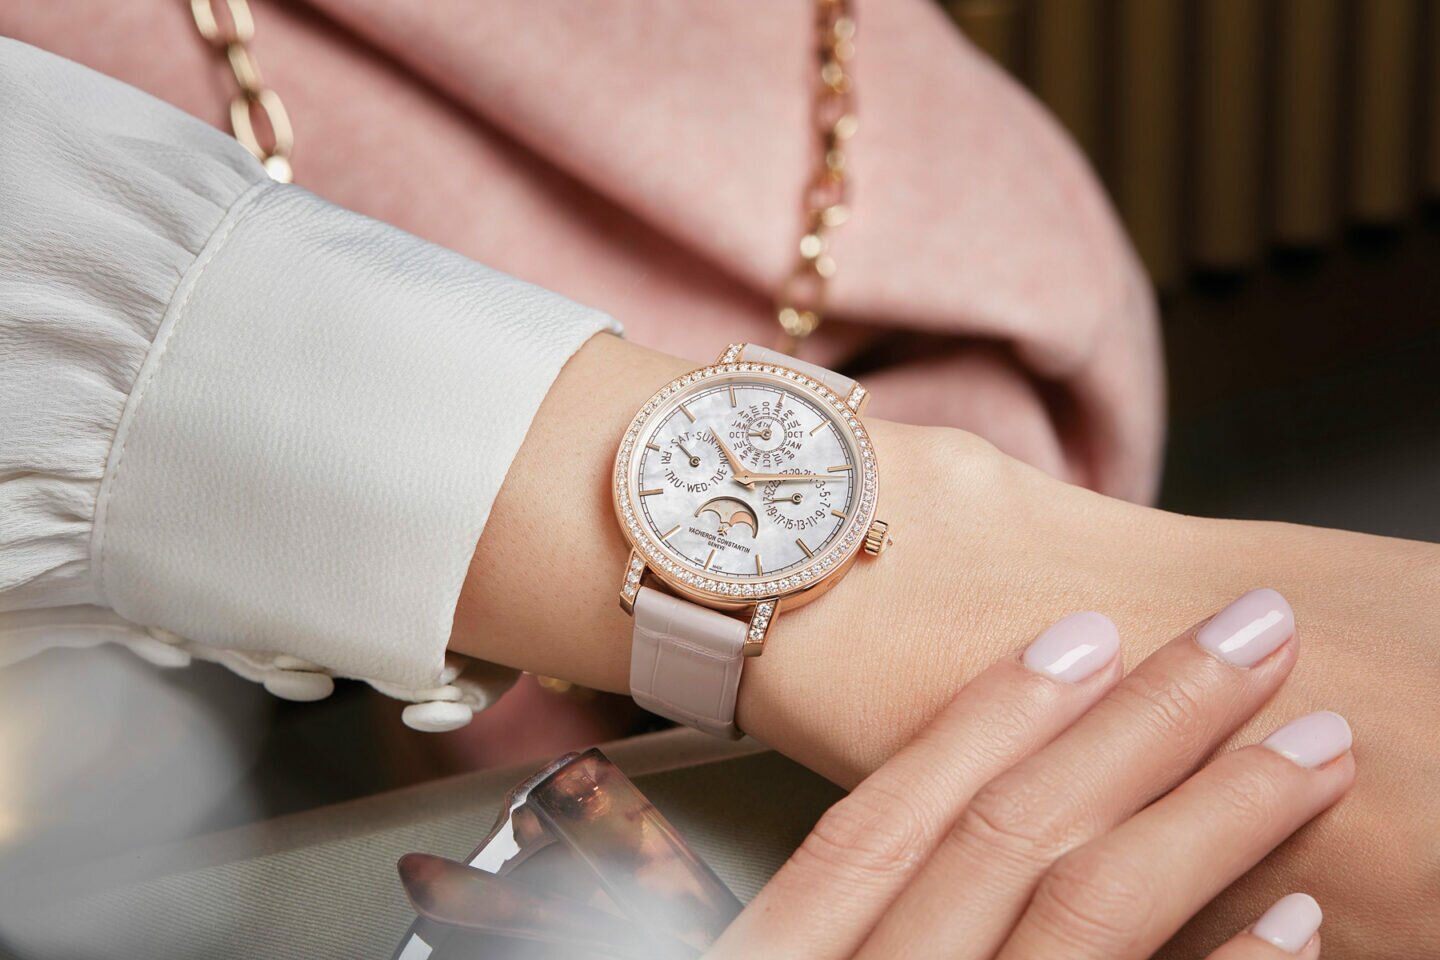 Vacheron Constantin’s New Ladies’ Models Are A Tribute to Female Collectors